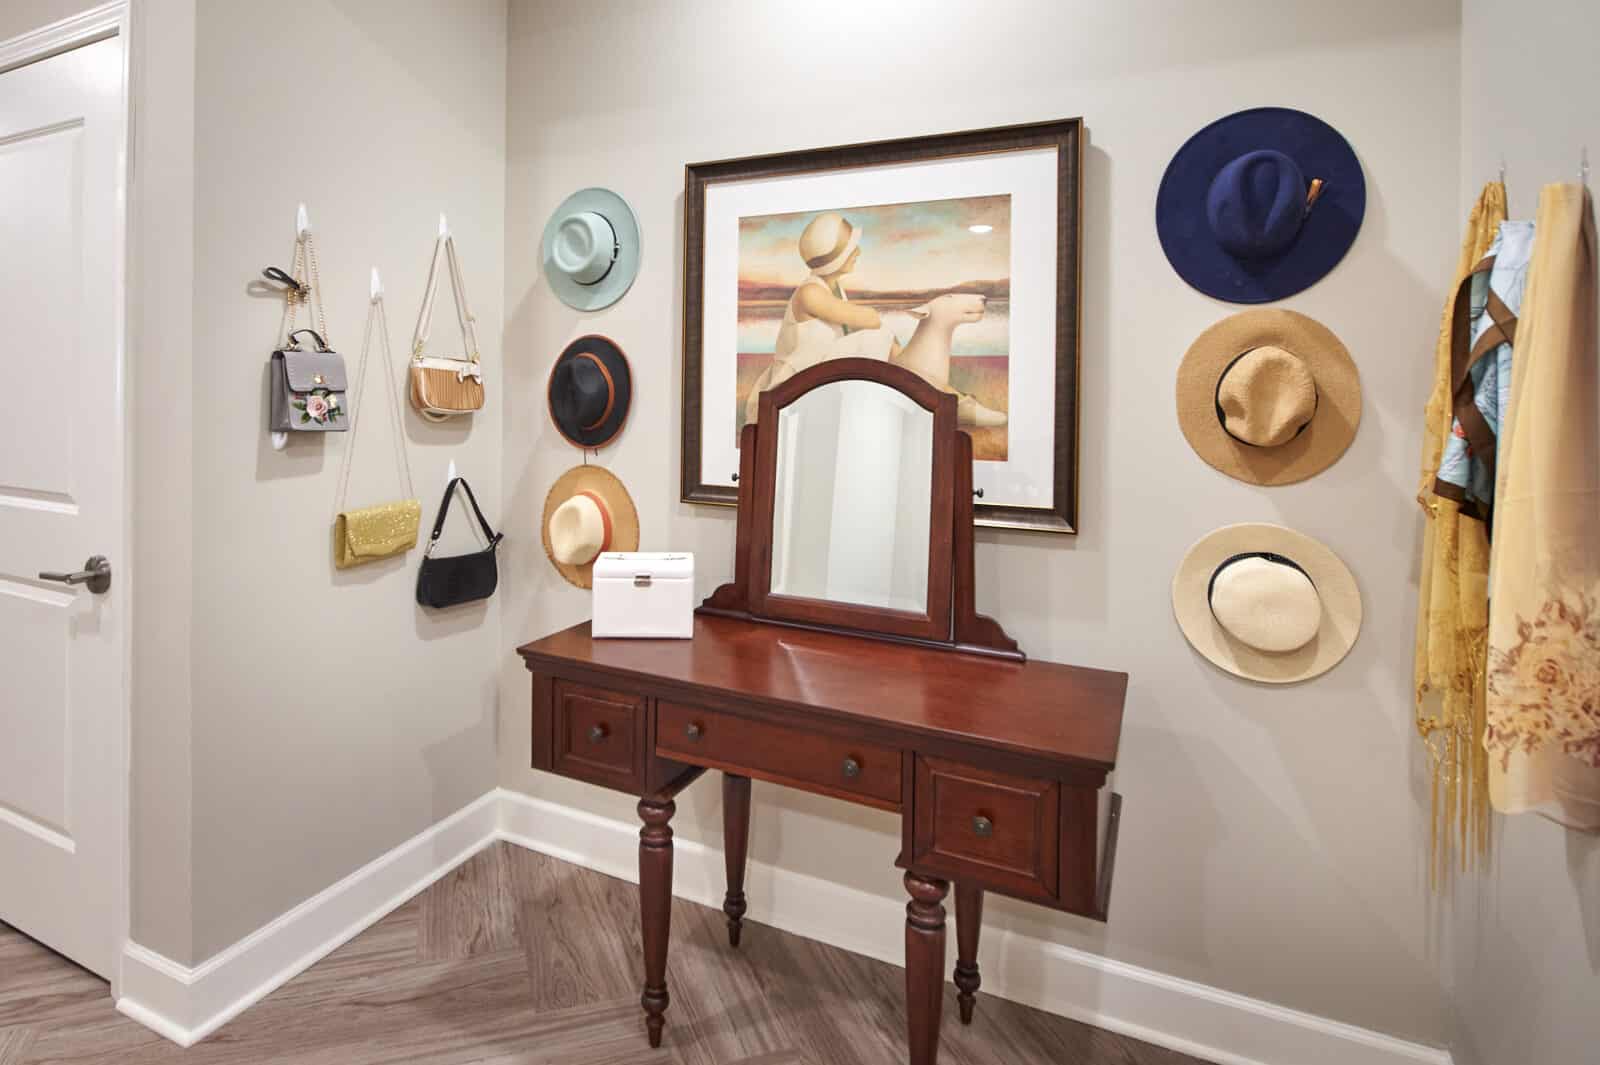 mirrored dressing station with hats on hung on the wall